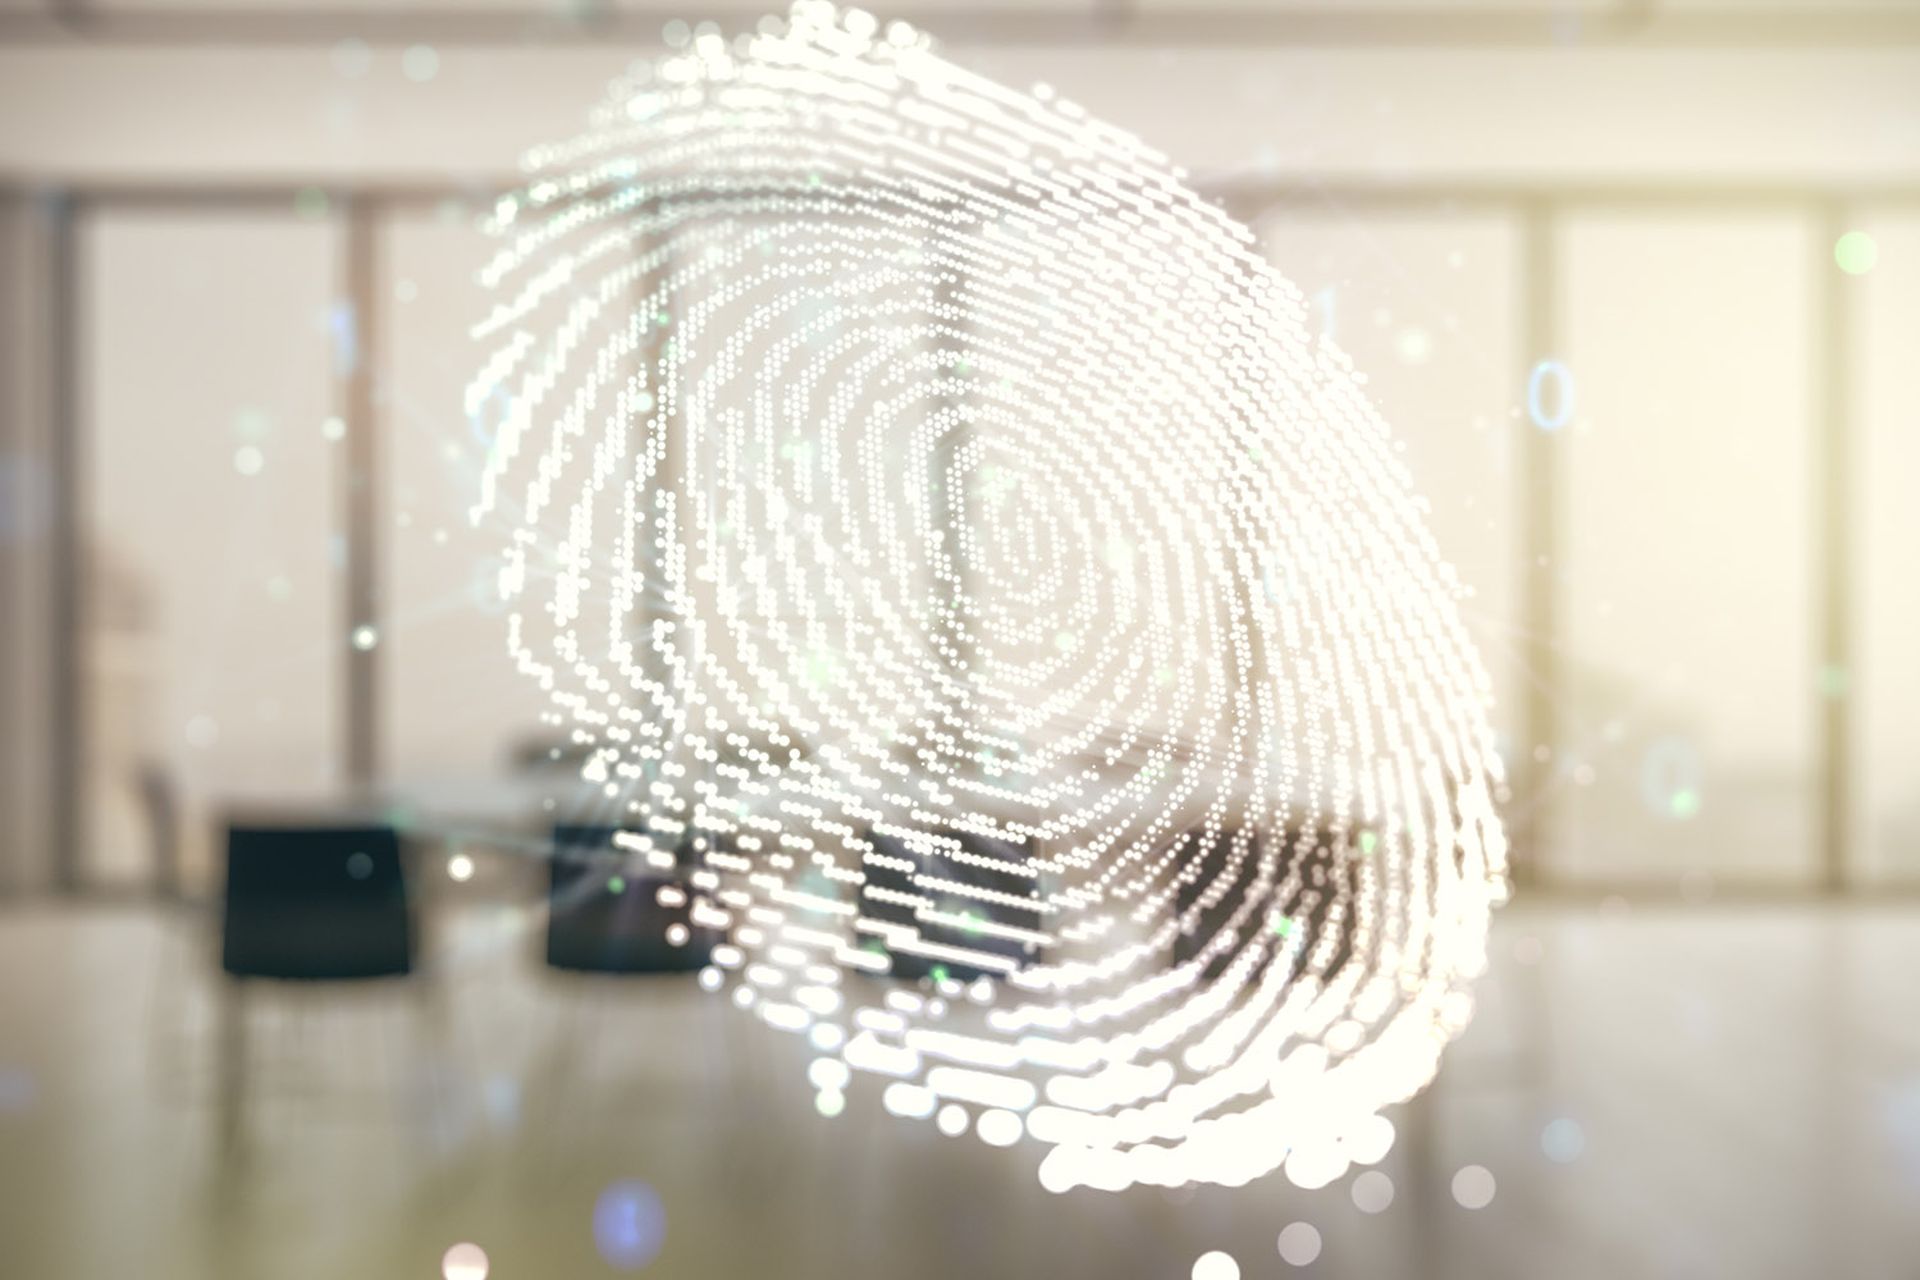 Abstract virtual fingerprint illustration on a modern coworking room background, personal biometric data concept.